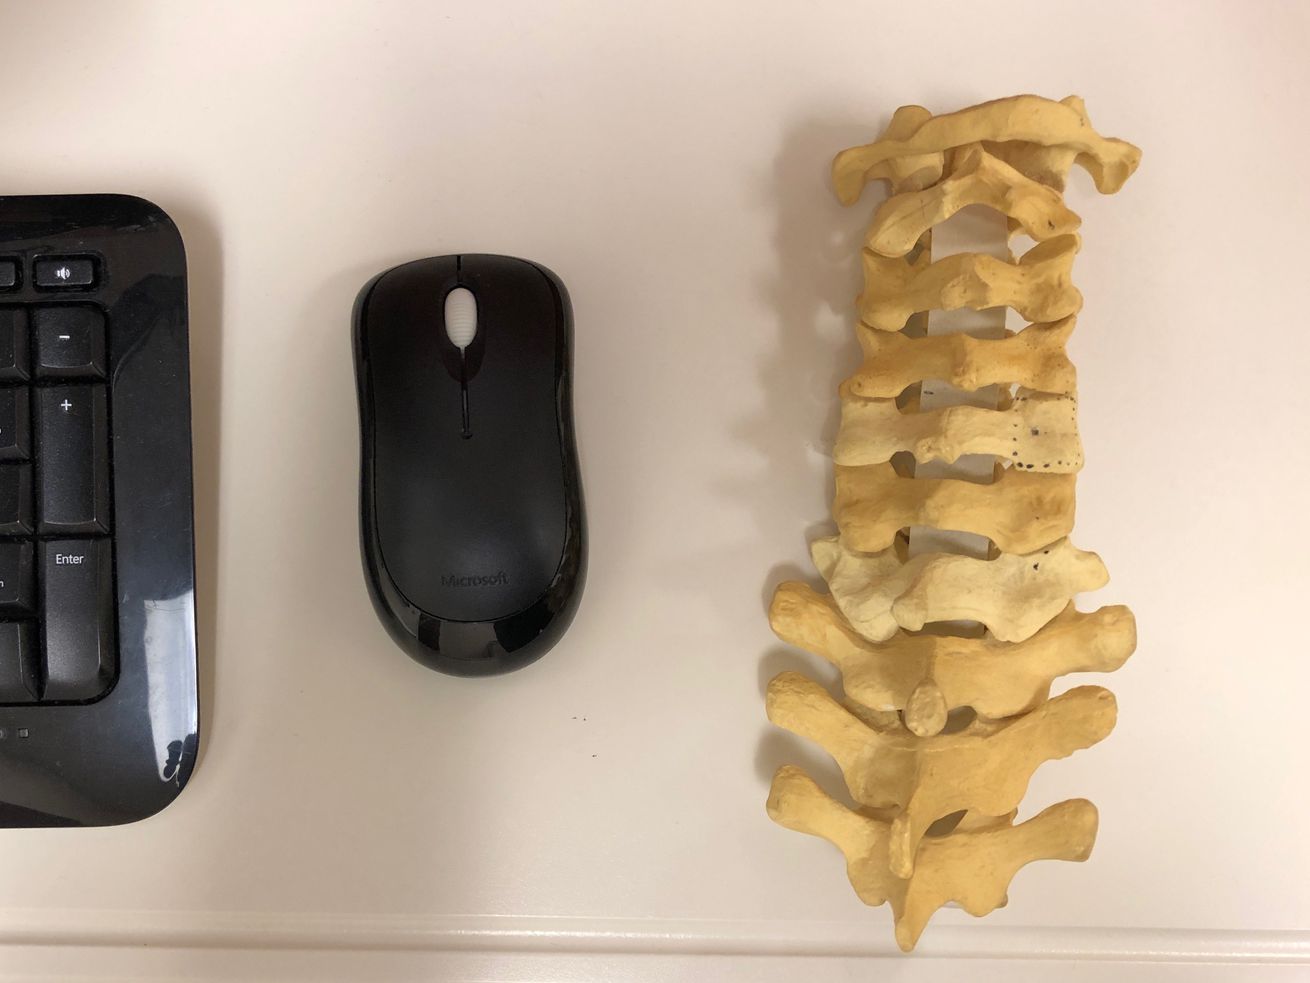 A model of the cervical bones of the spine next to a computer mouse and keyboard.